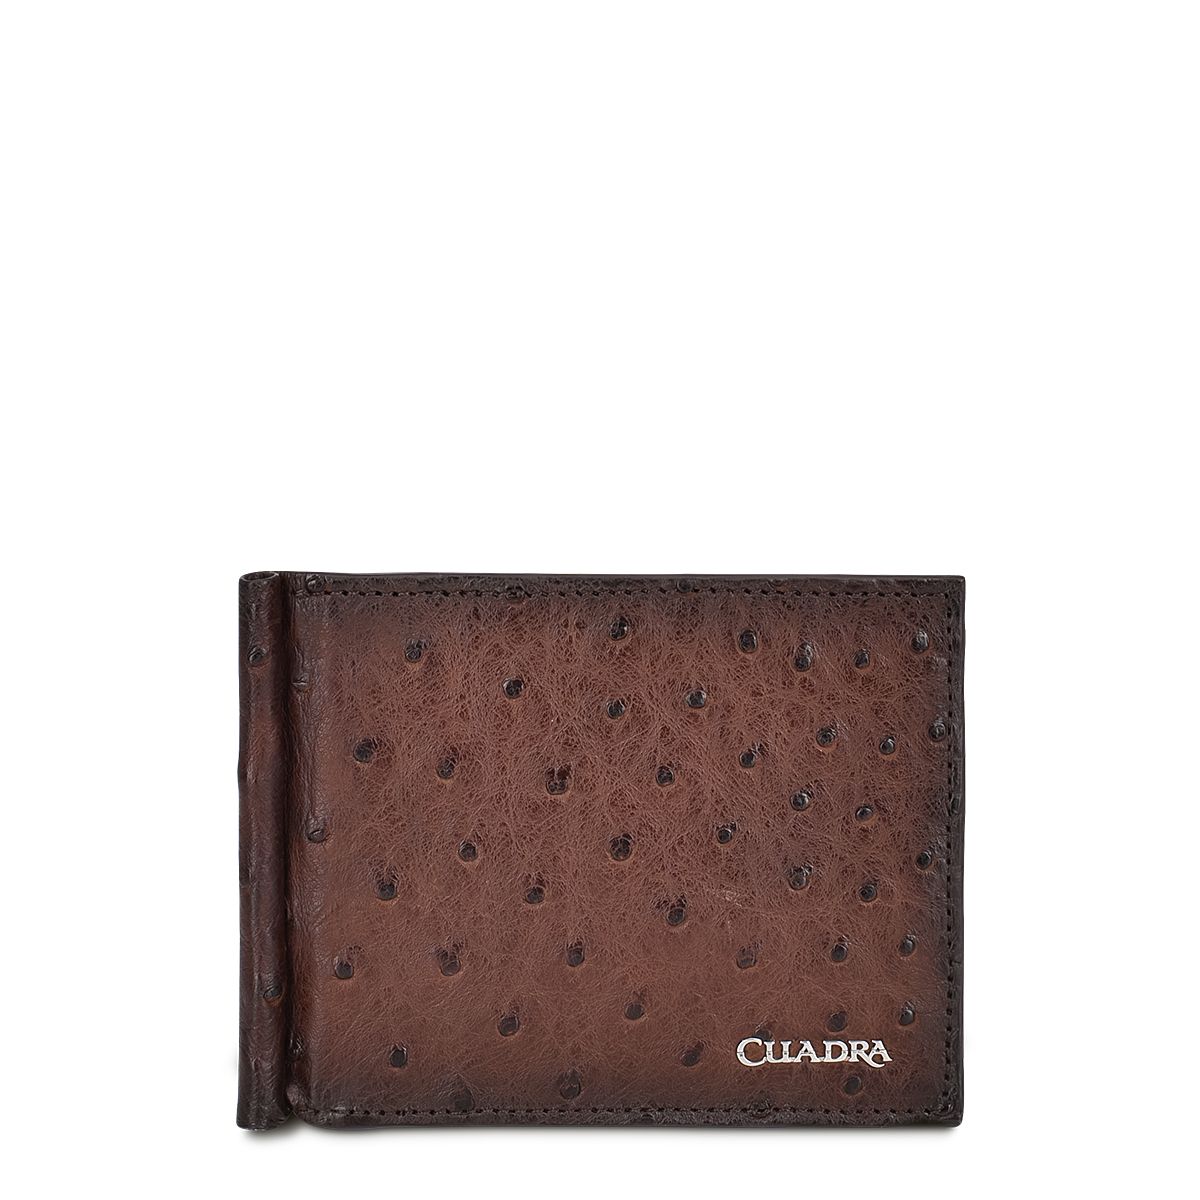 B3042A1 - Cuadra brown tobacco classic full quill ostrich leather bi fold wallet for men-Kuet.us